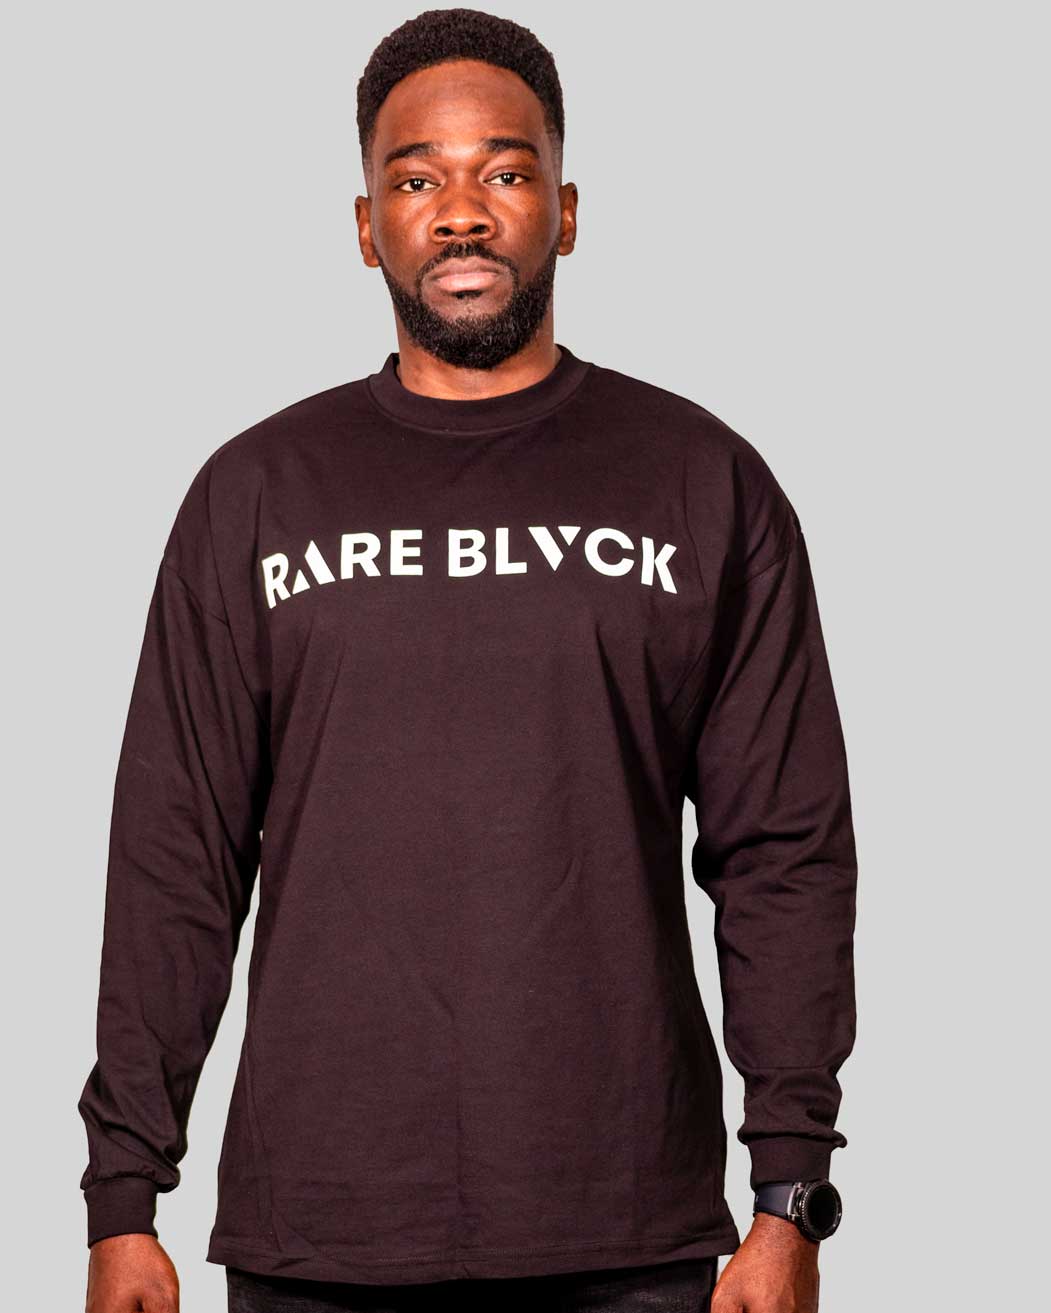 Best Selling Shopify Products on blvck.com-2